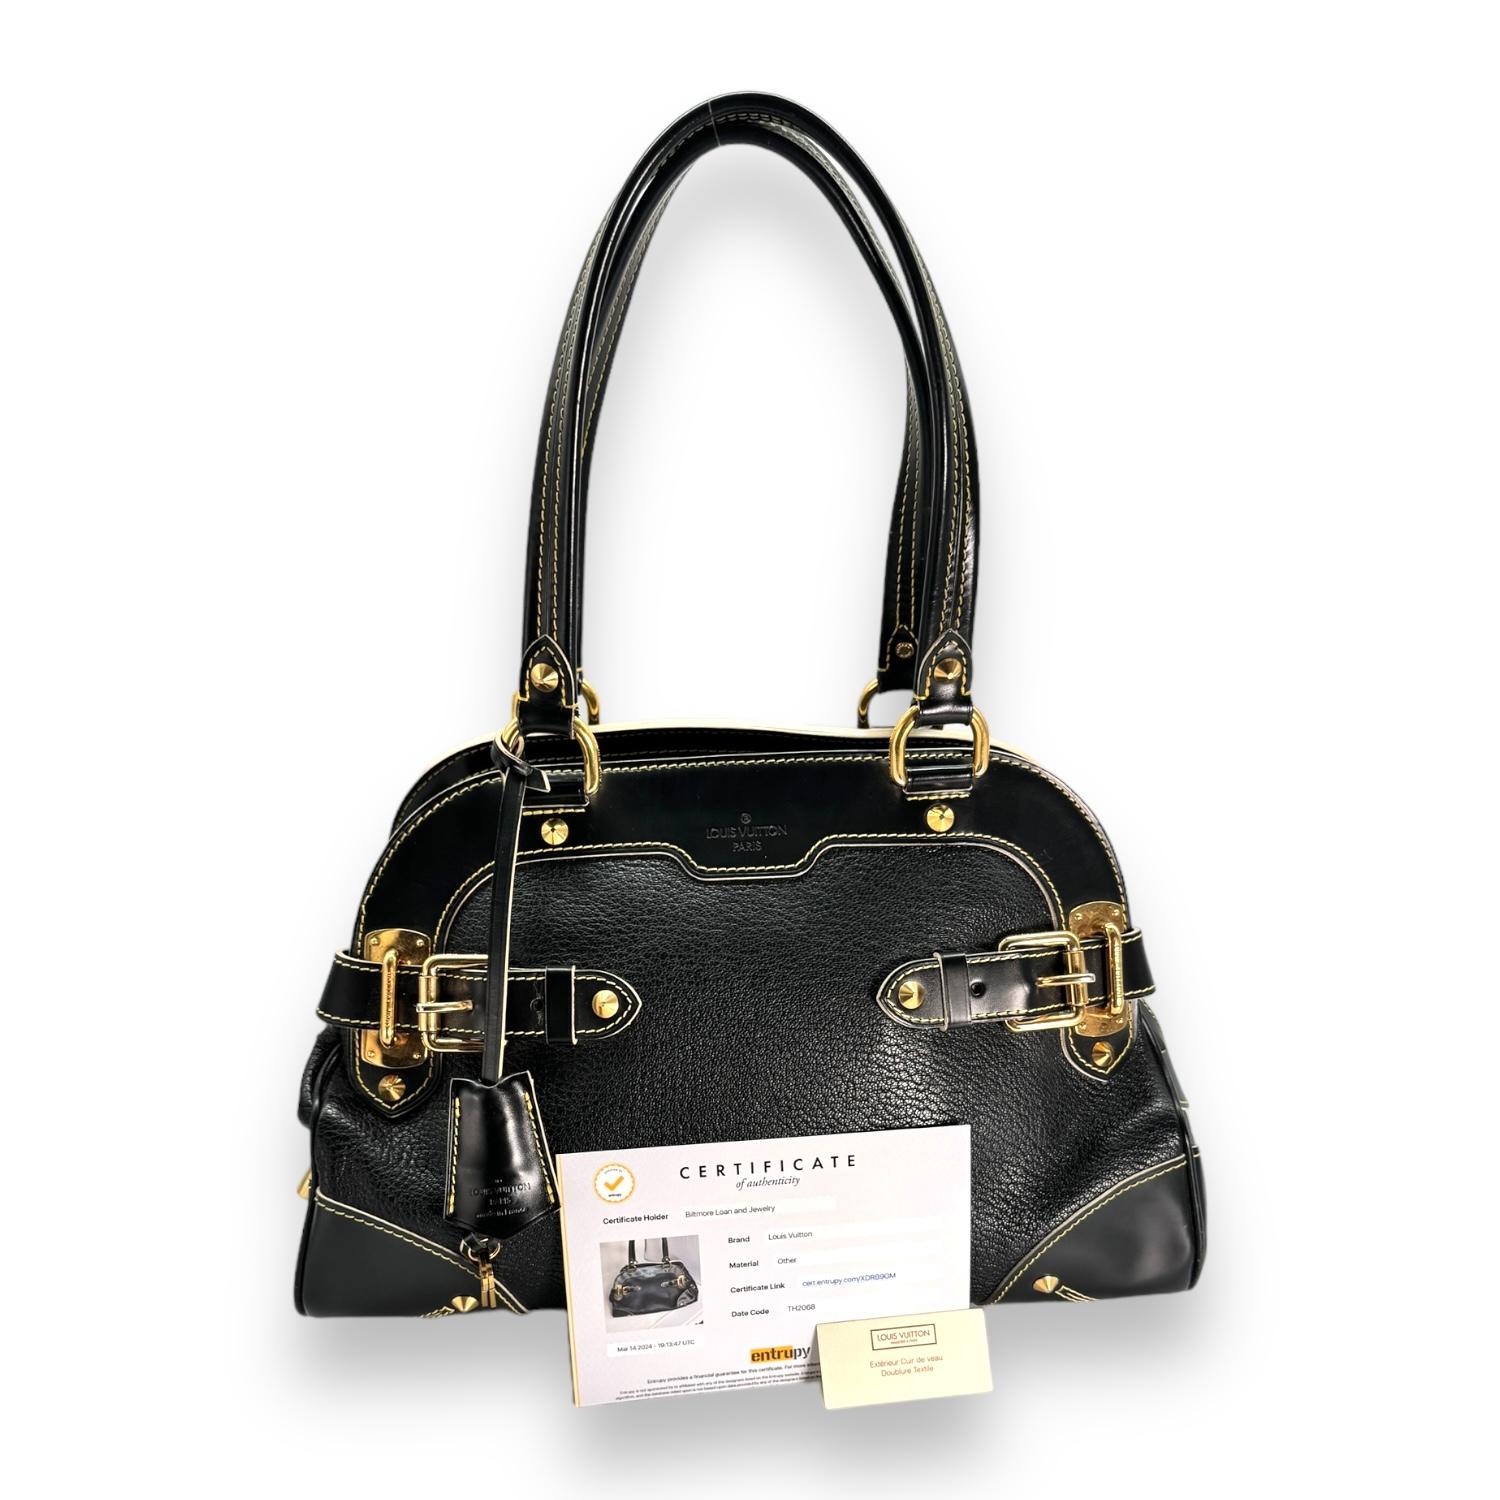 This Louis Vuitton Black Suhali Le Radieux Satchel is the ultimate statement piece for any fashion-forward individual. Made from luxurious black Suhali goatskin leather, it exudes elegance and sophistication. With three interior pockets and a zip